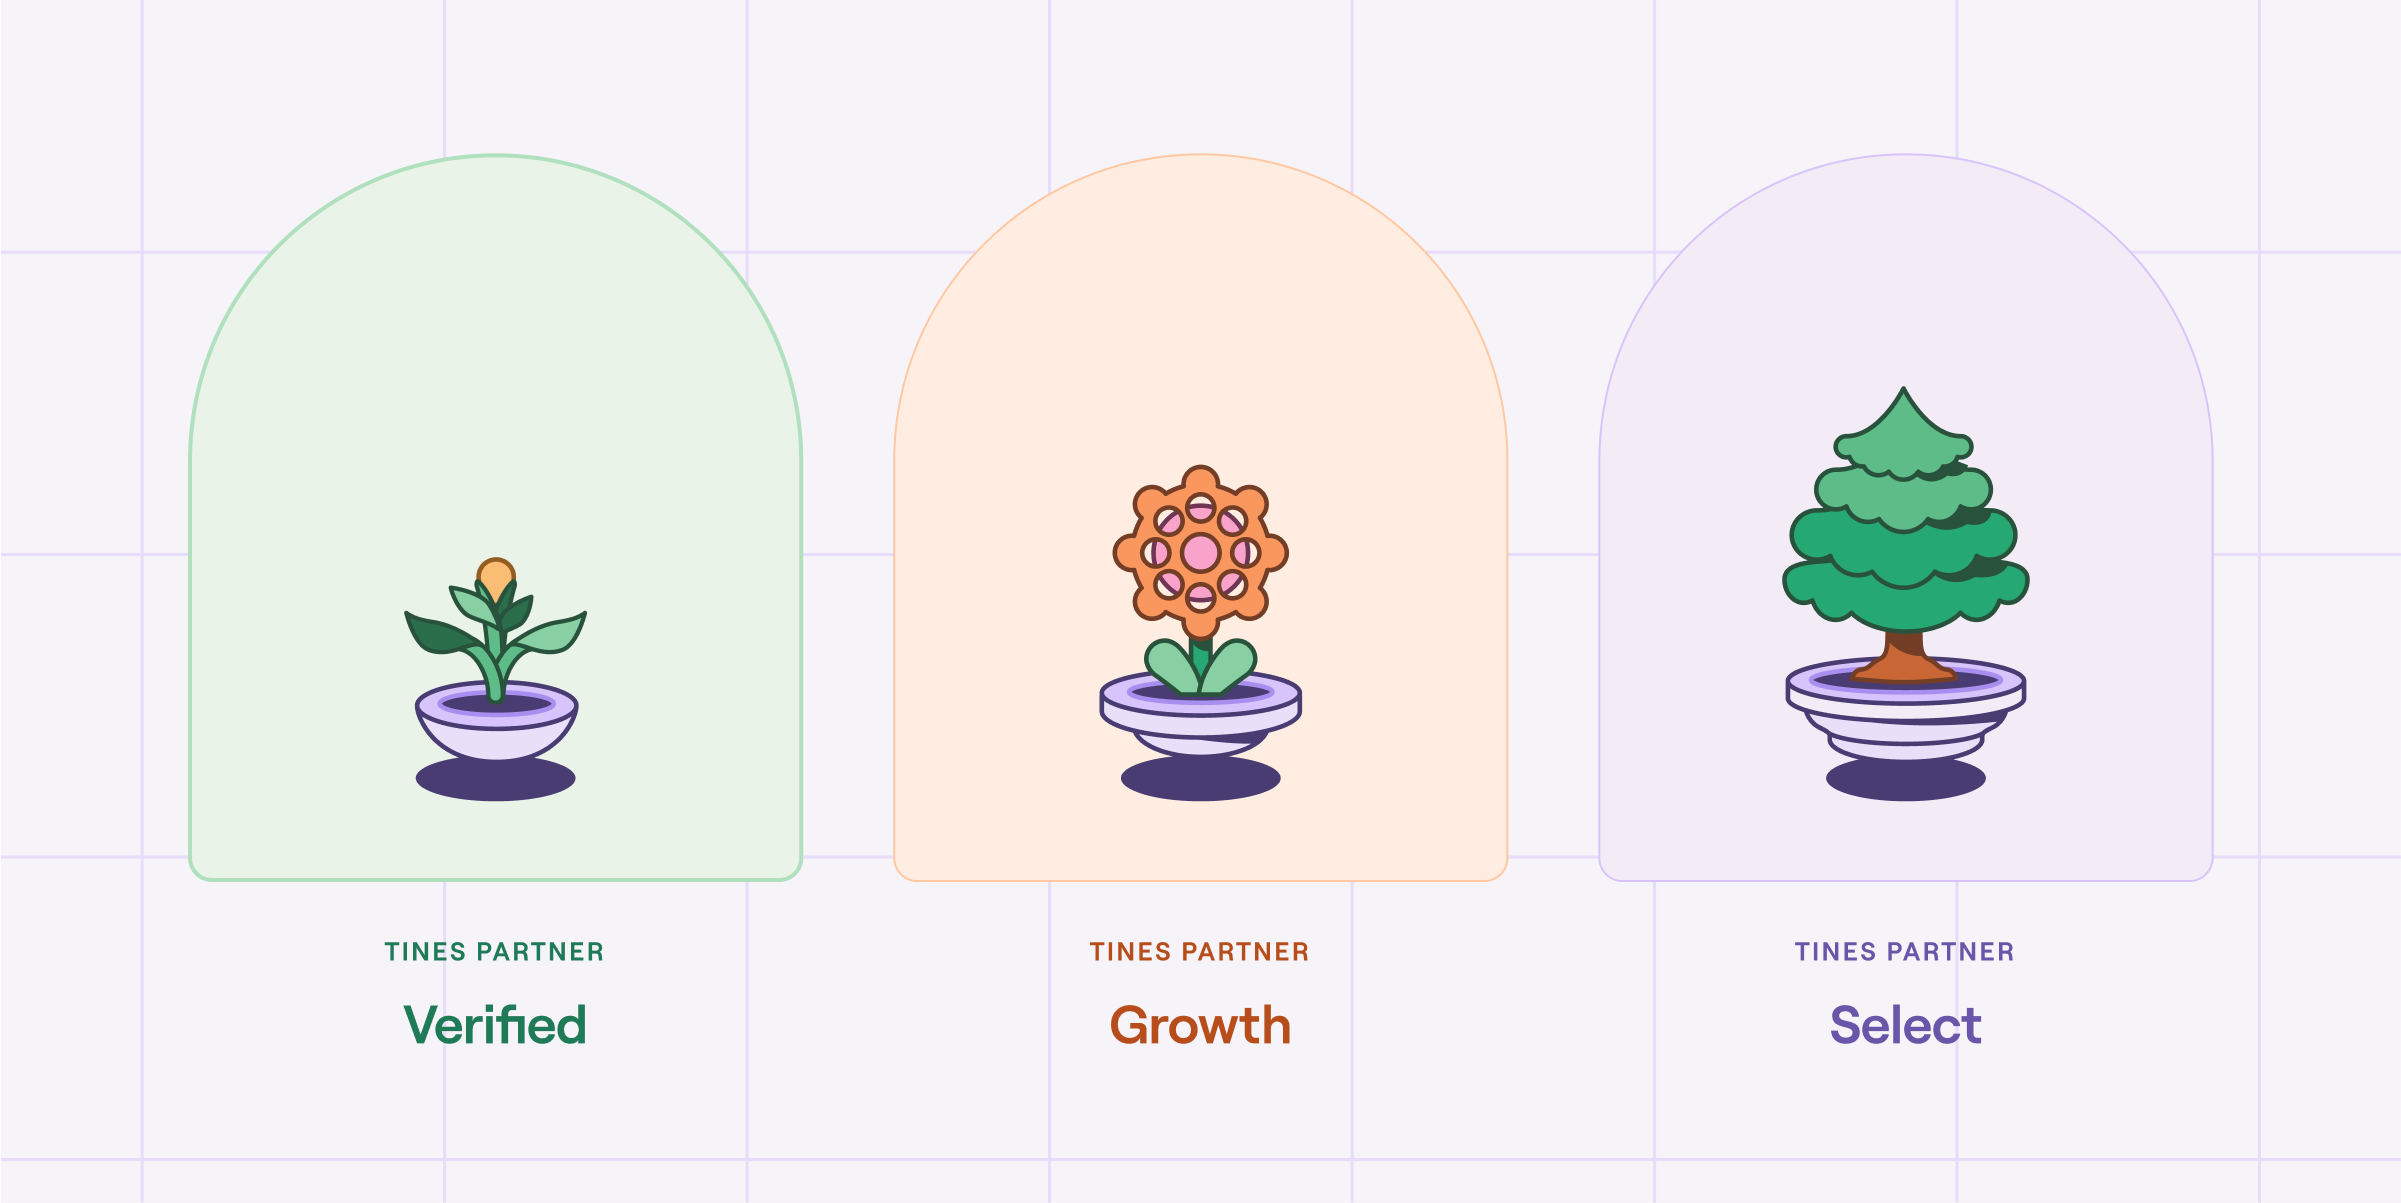 The three Tines channel partner program tiers, represented as icons: Verified, Growth and Select